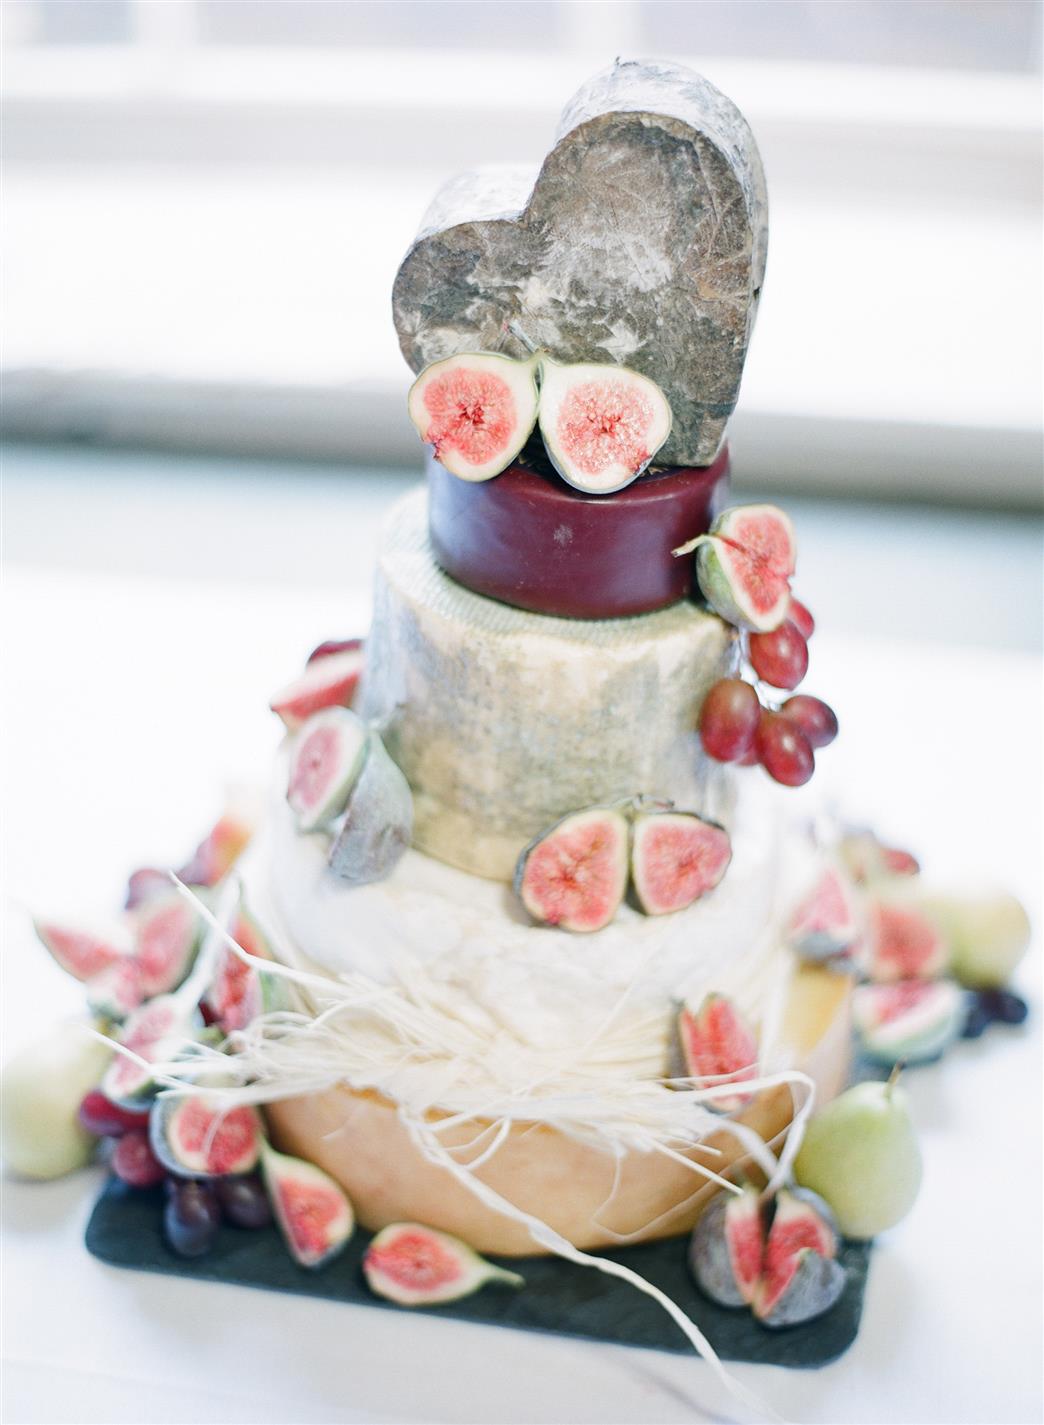 Cheese Wheel Wedding Cake - A 1940s Wedding Dress for a Sweet Spring Wedding from Taylor & Porter Photography